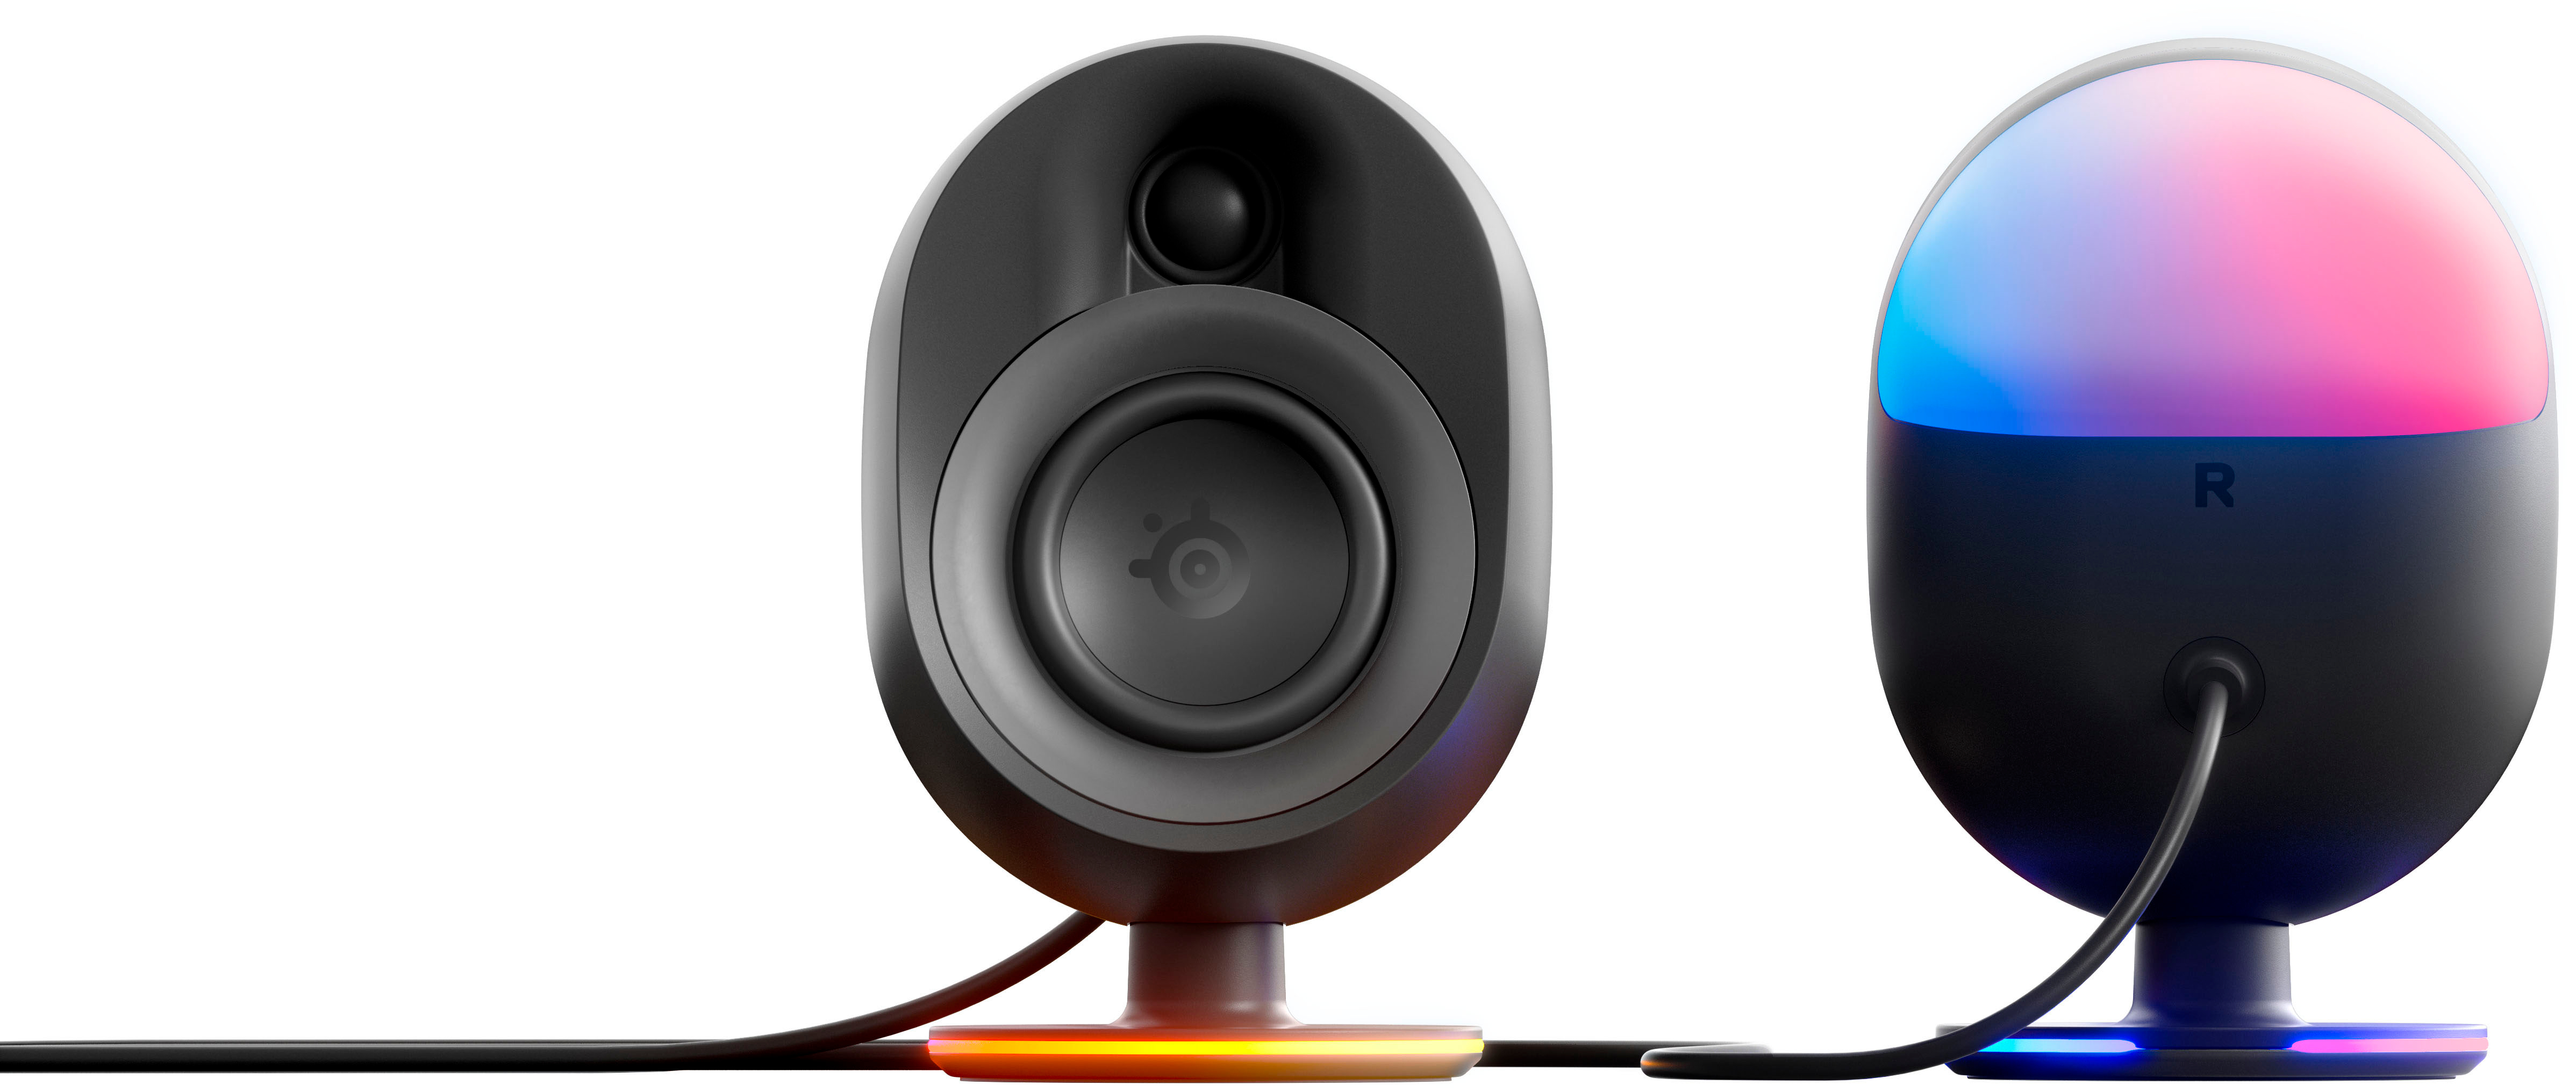 Angle View: SteelSeries - Arena 9 5.1 Bluetooth Gaming Speakers with RGB Lighting (6 Piece) - Black